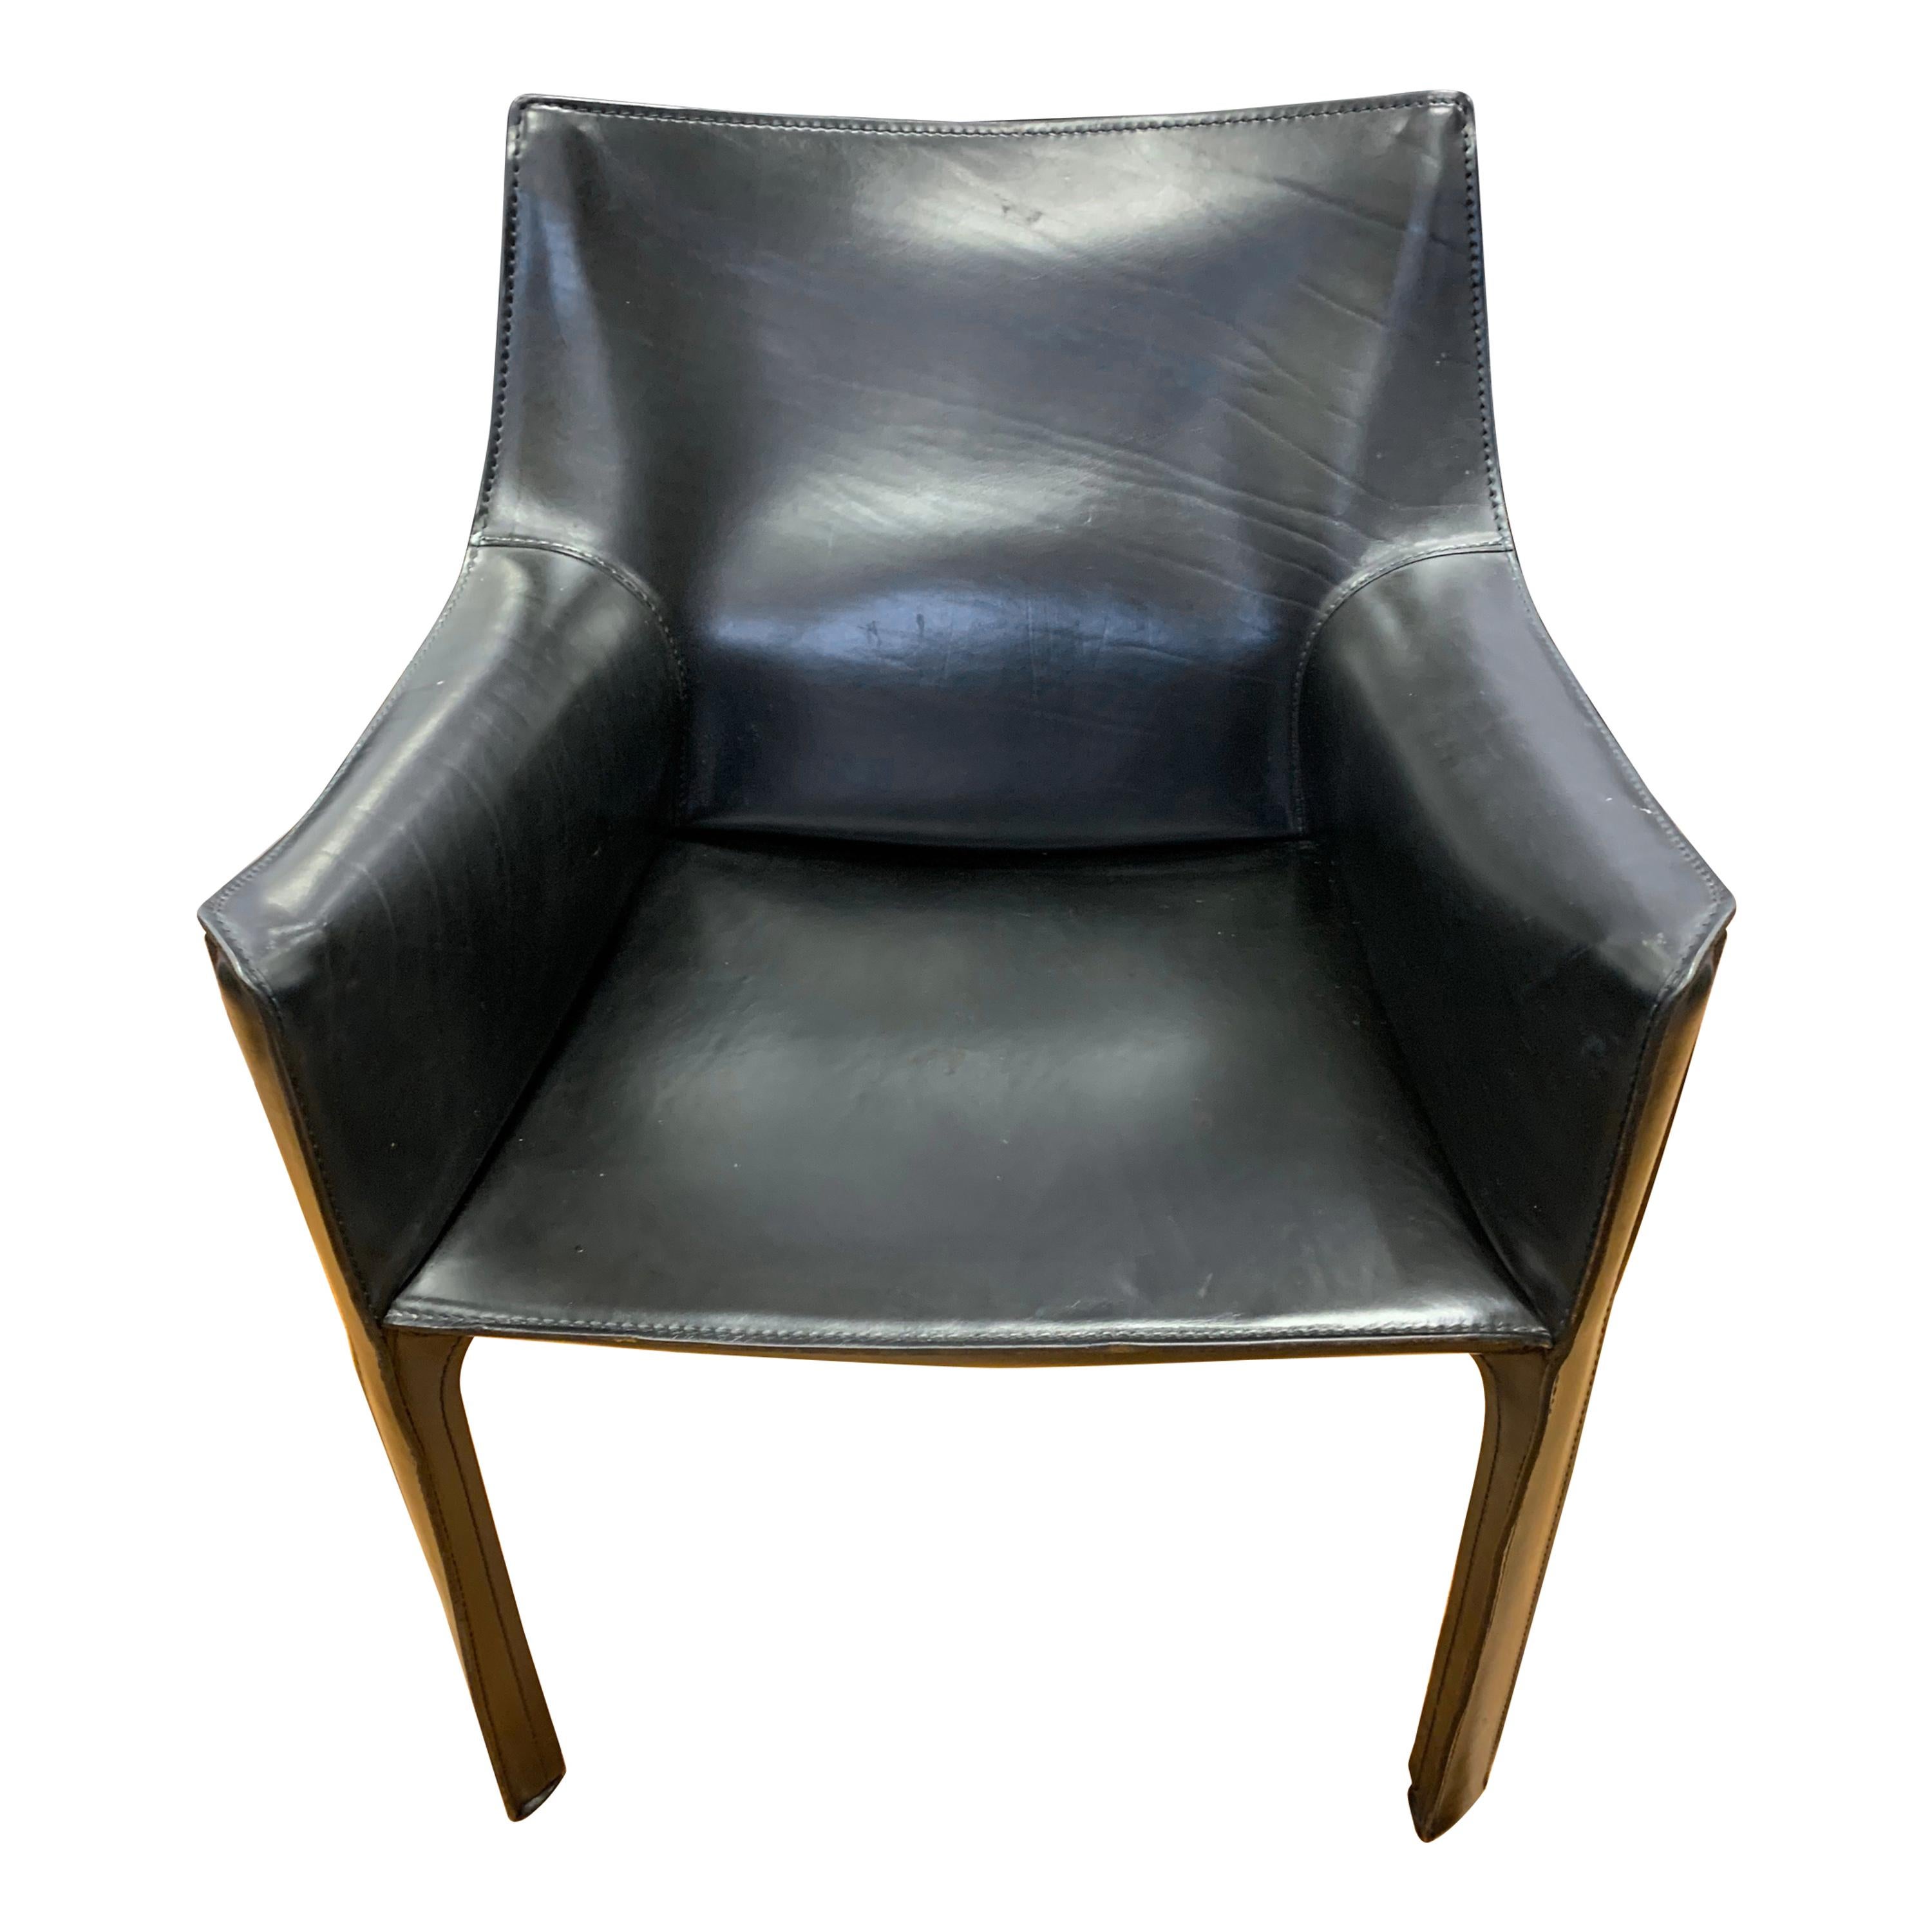 Mario Bellini for Cassina Signed Cab Armchair Black Leather